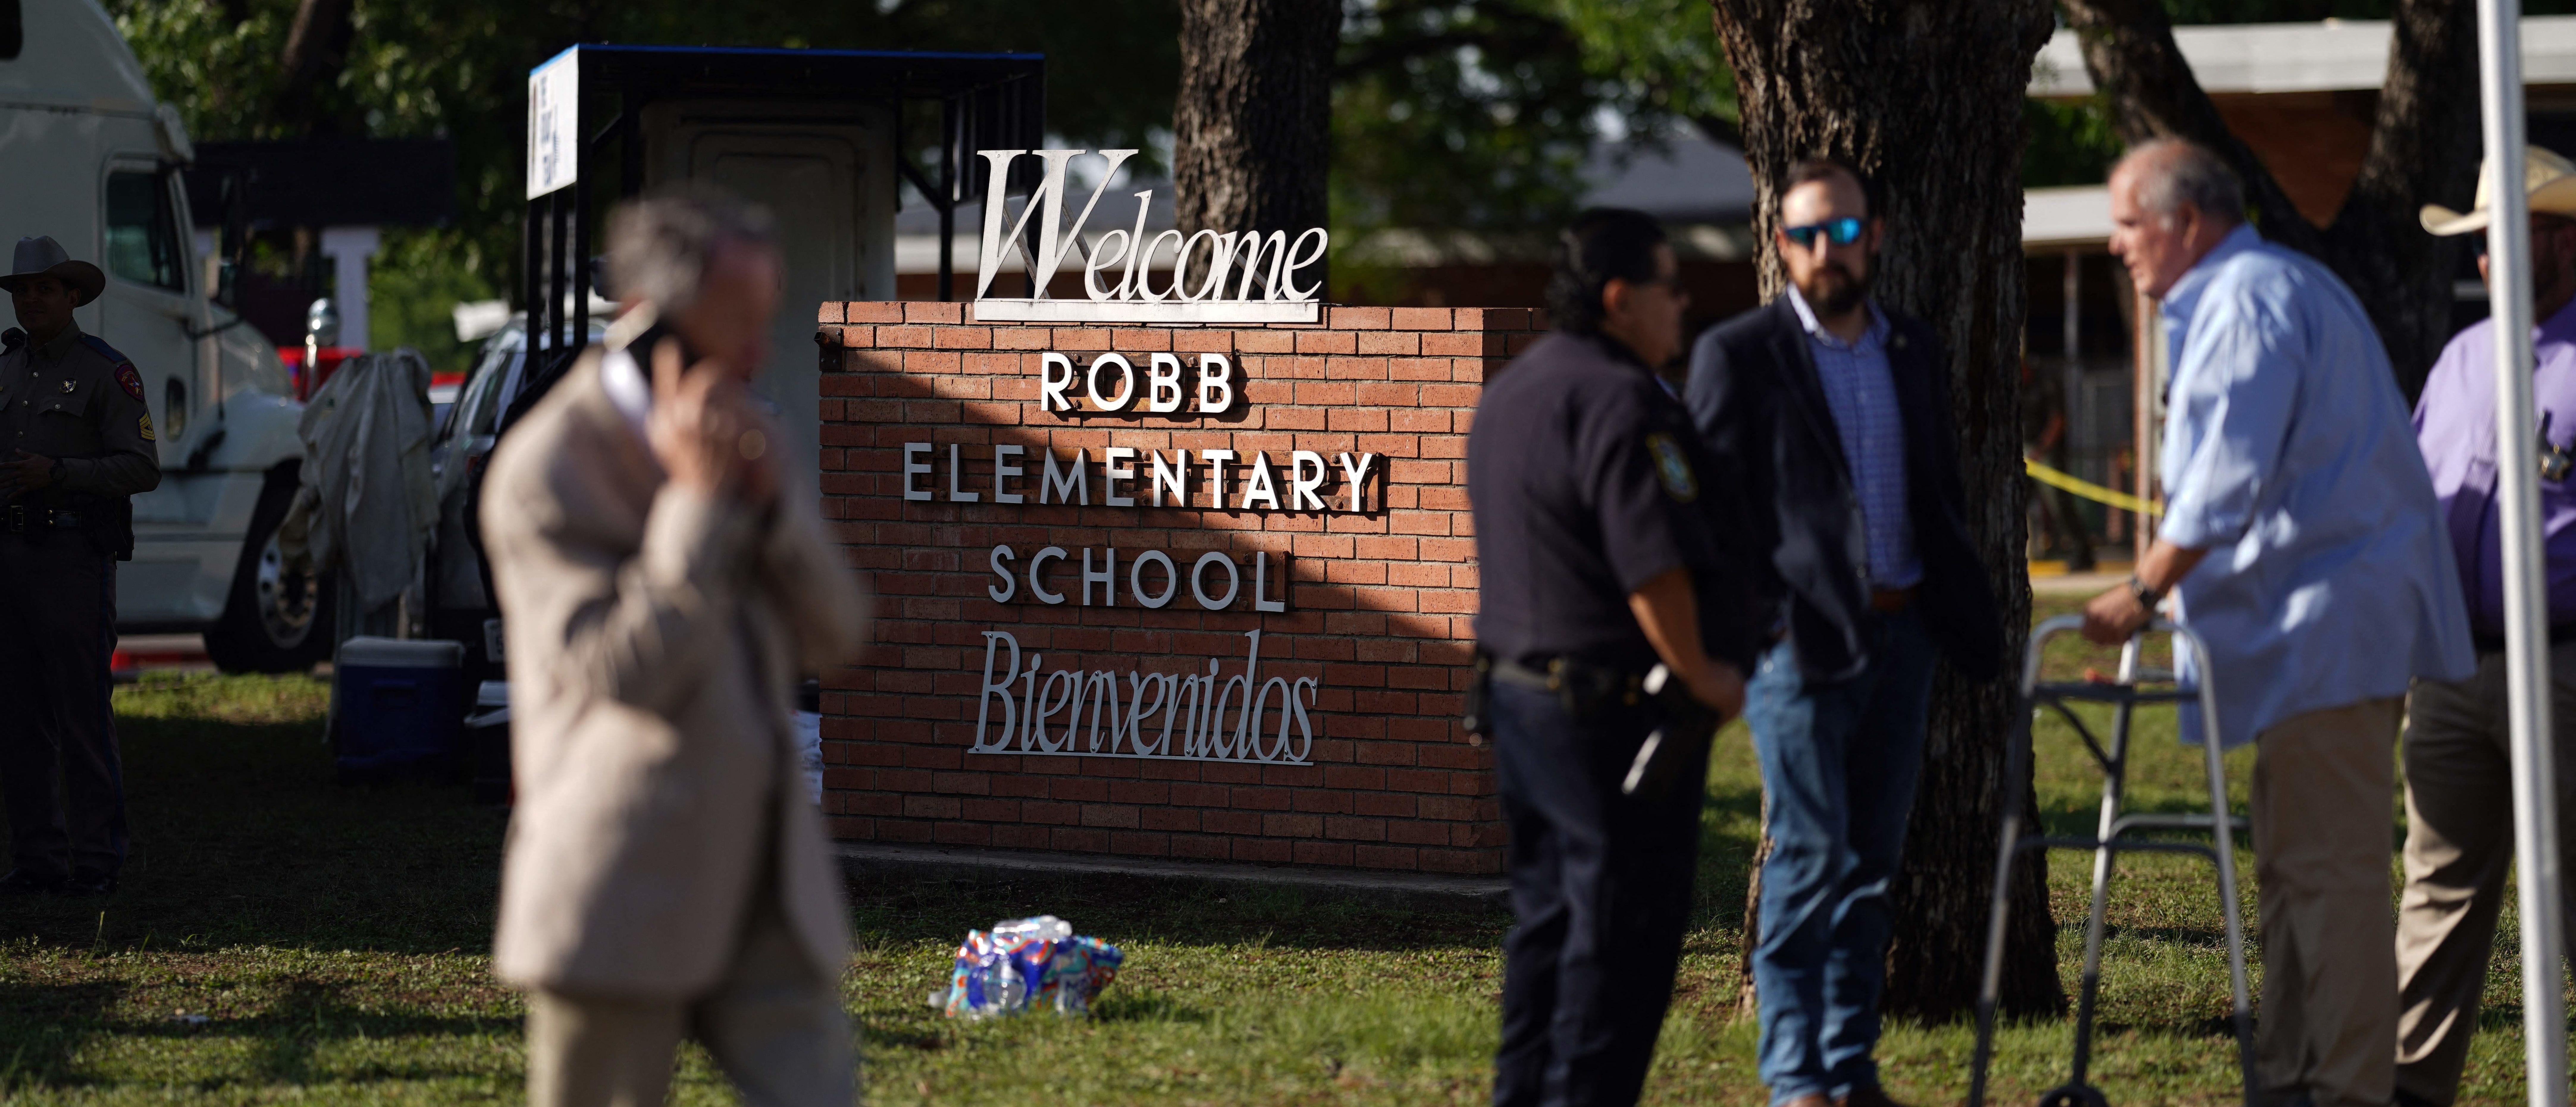 Uvalde, Texas, Mayor Don McLaughlin (R) speaks with an officer outside Robb Elementary School in Uvalde, Texas, on May 25, 2022. - A tight-knit Latino community in Texas was wracked with grief Wednesday after a teen in body armor marched into an elementary school and killed 19 small children and two teachers, in the latest spasm of deadly gun violence in America. (Photo by allison dinner / AFP) (Photo by ALLISON DINNER/AFP via Getty Images)